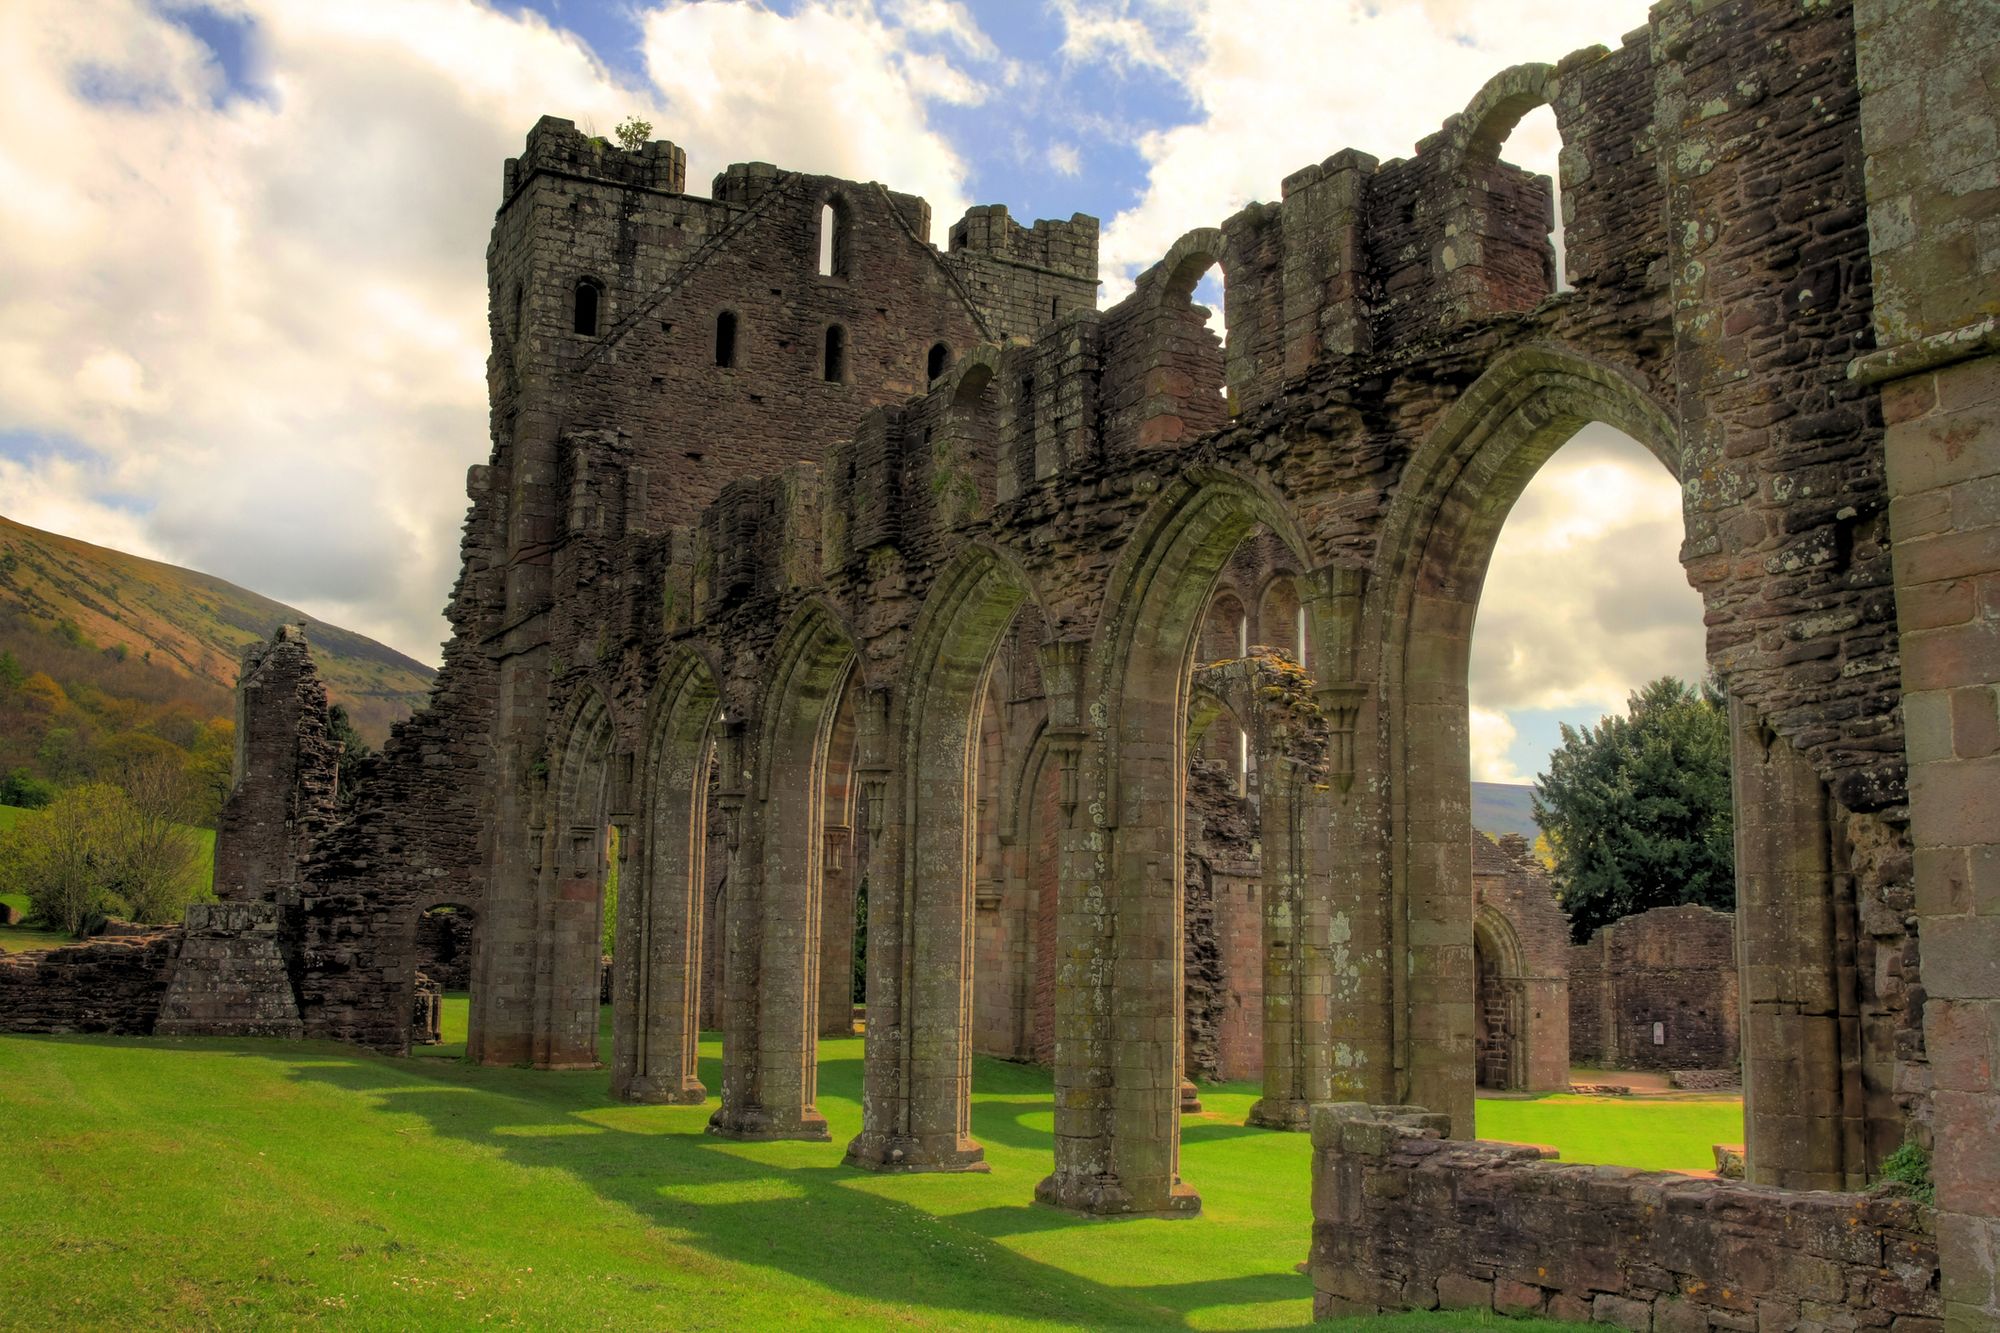 Llanthony Priory, in Wales.